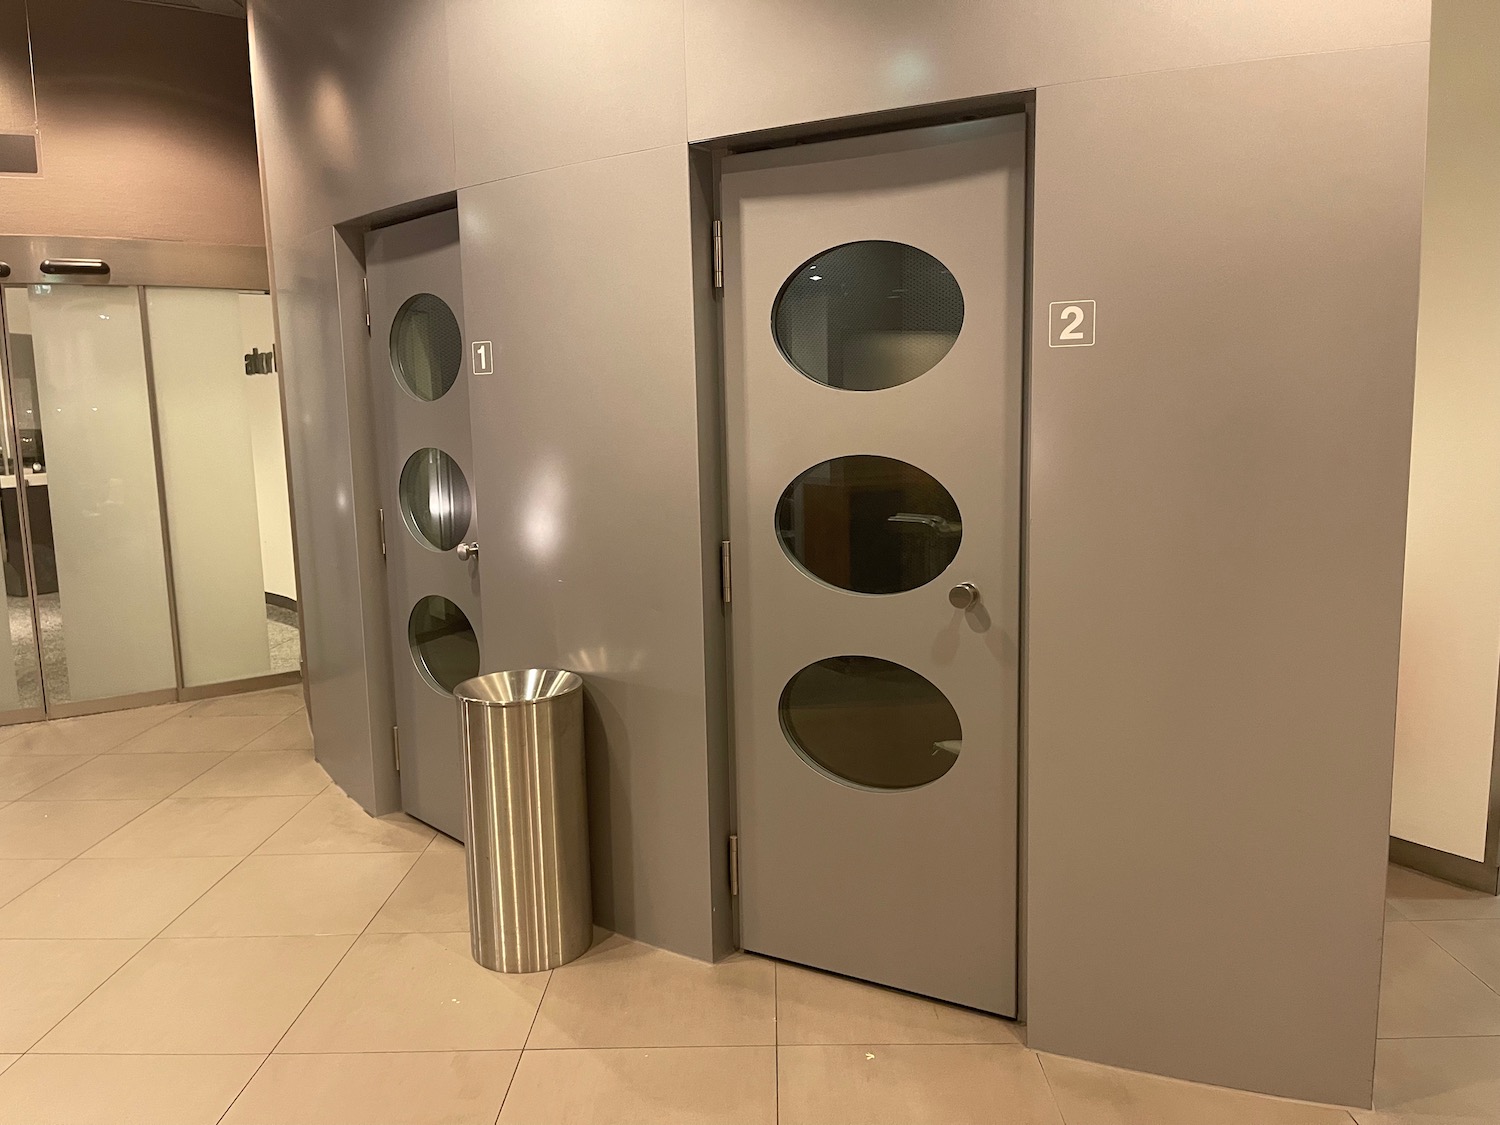 a door with oval windows and a trash can